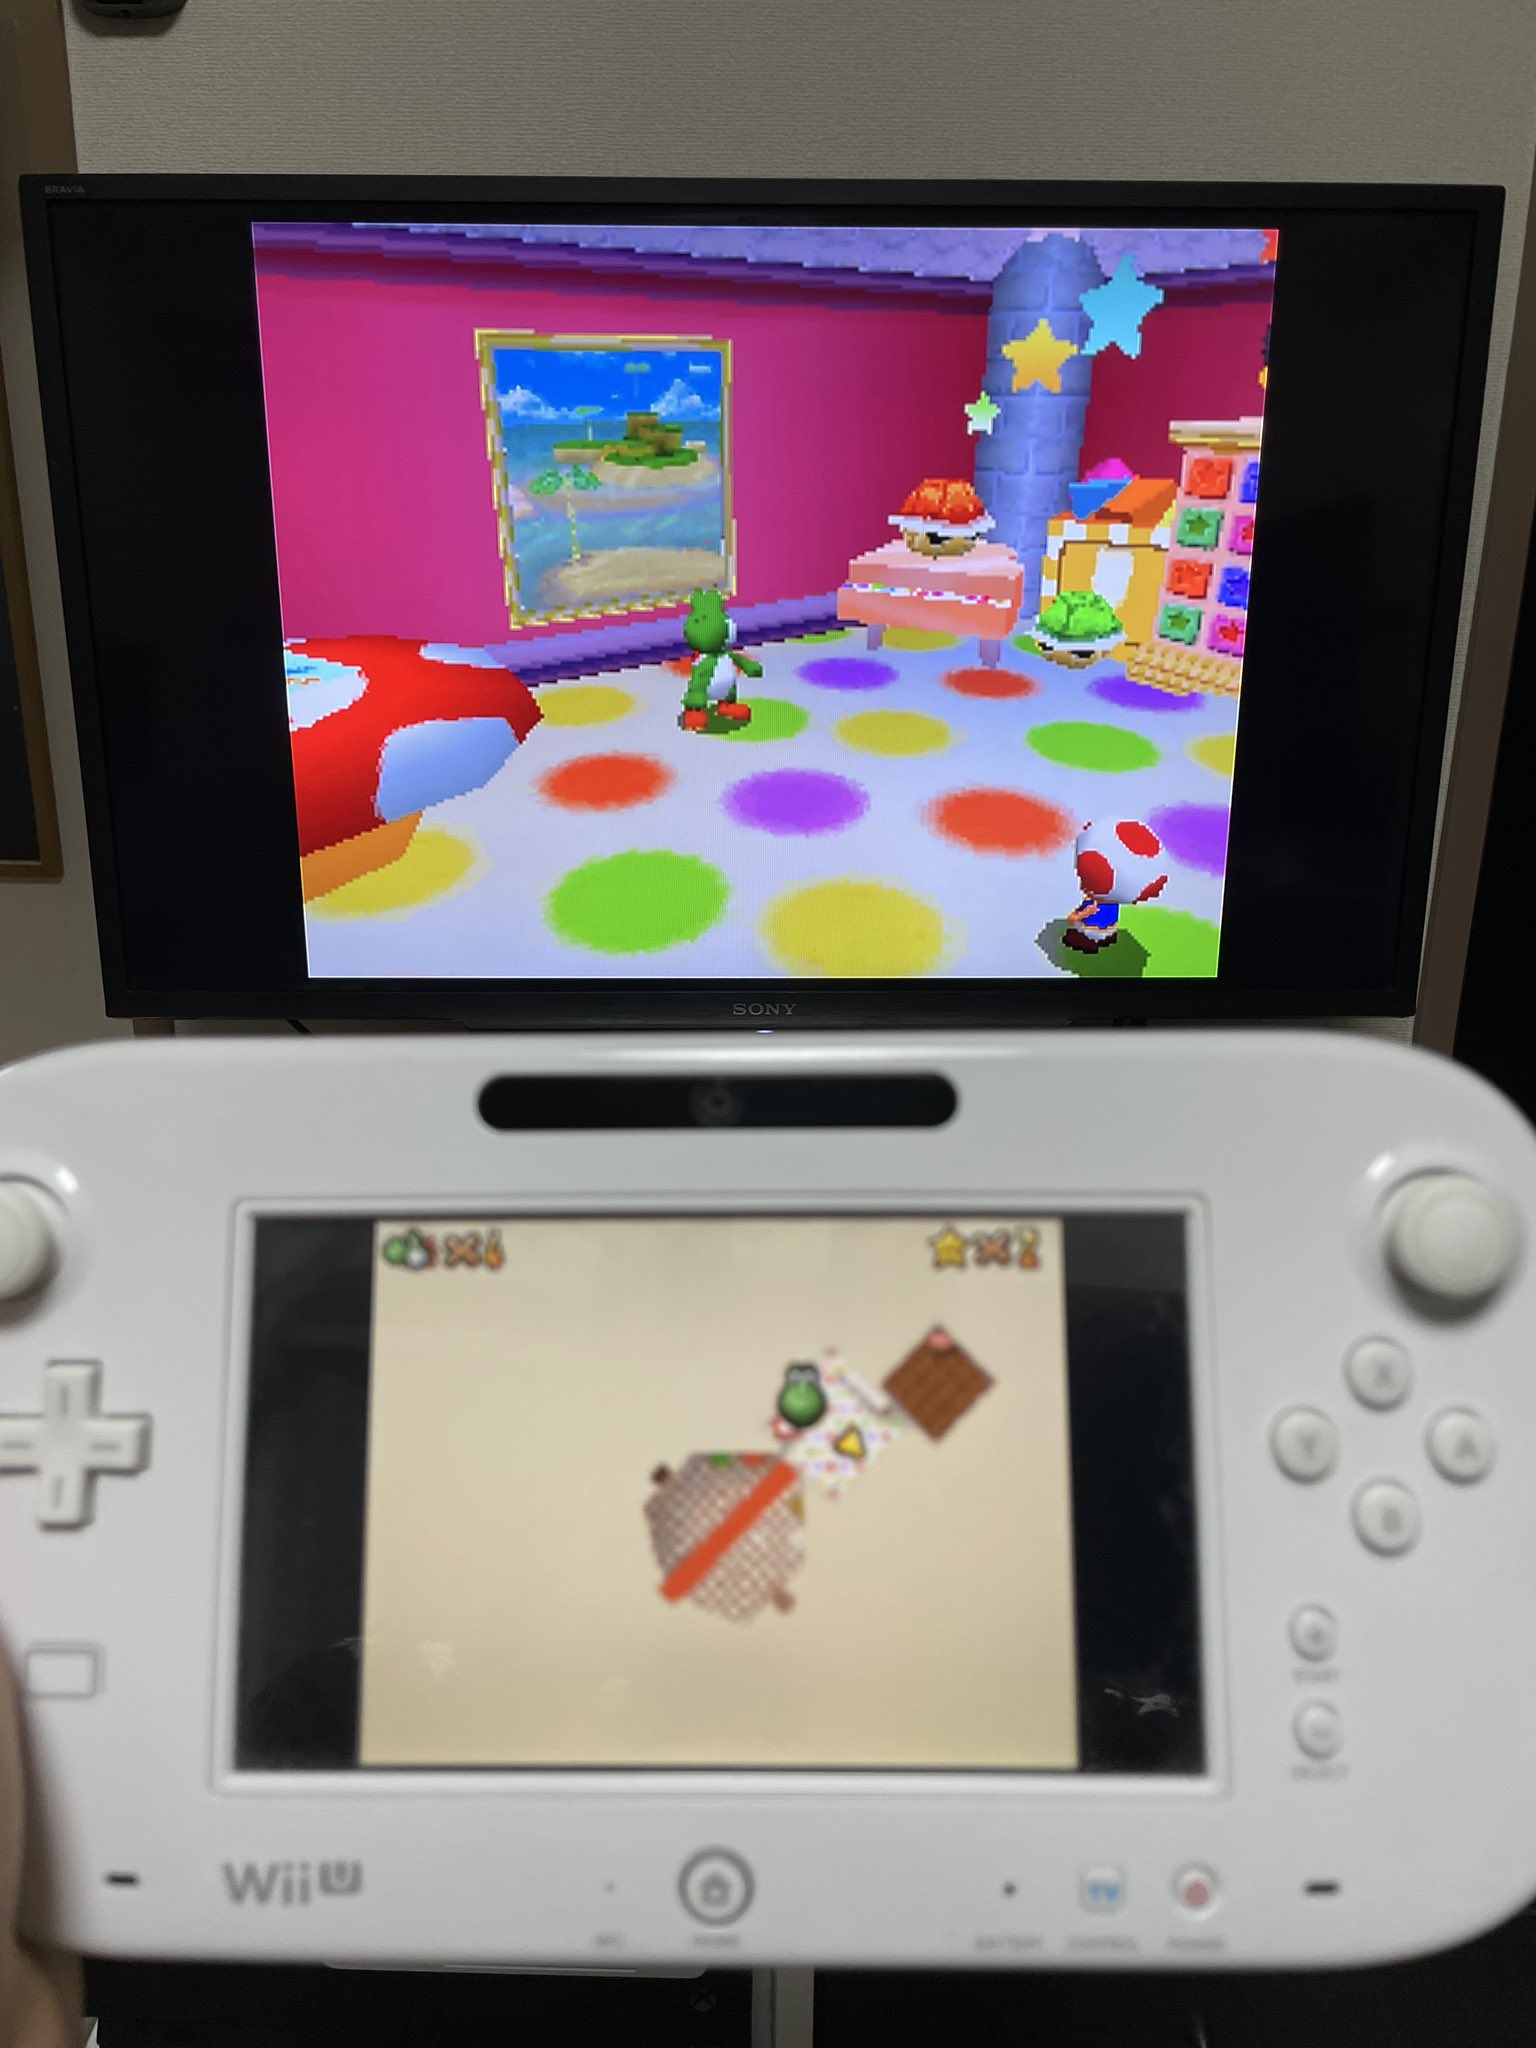 Wii U Virtual Console Getting N64 and Nintendo DS Games - GameSpot